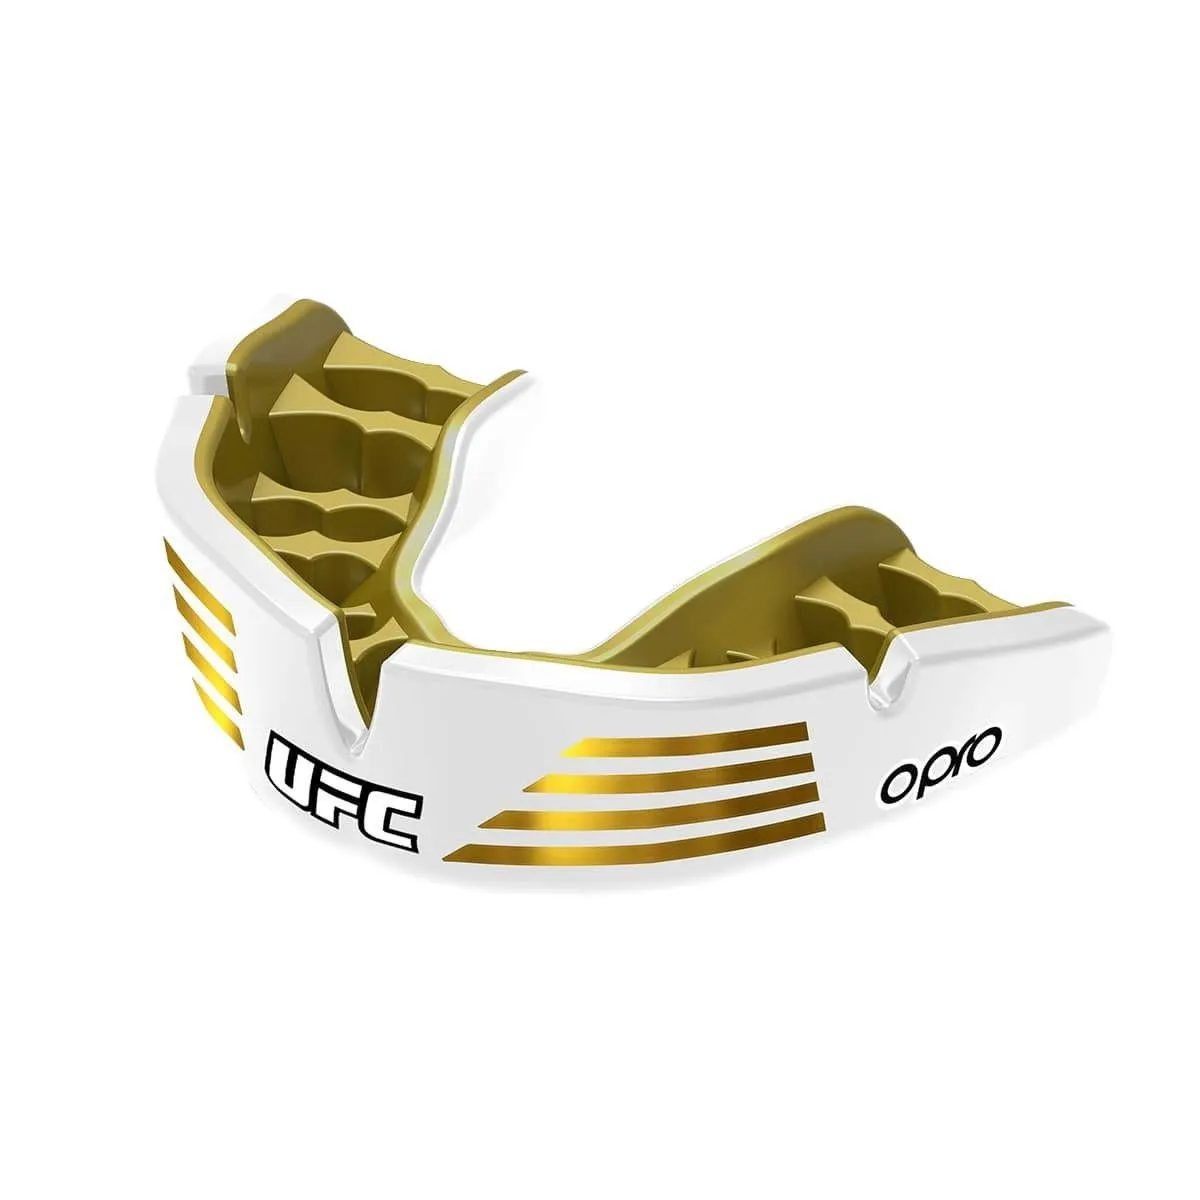 OPRO "UFC" mouthguard Insten Custom FIT gold/white